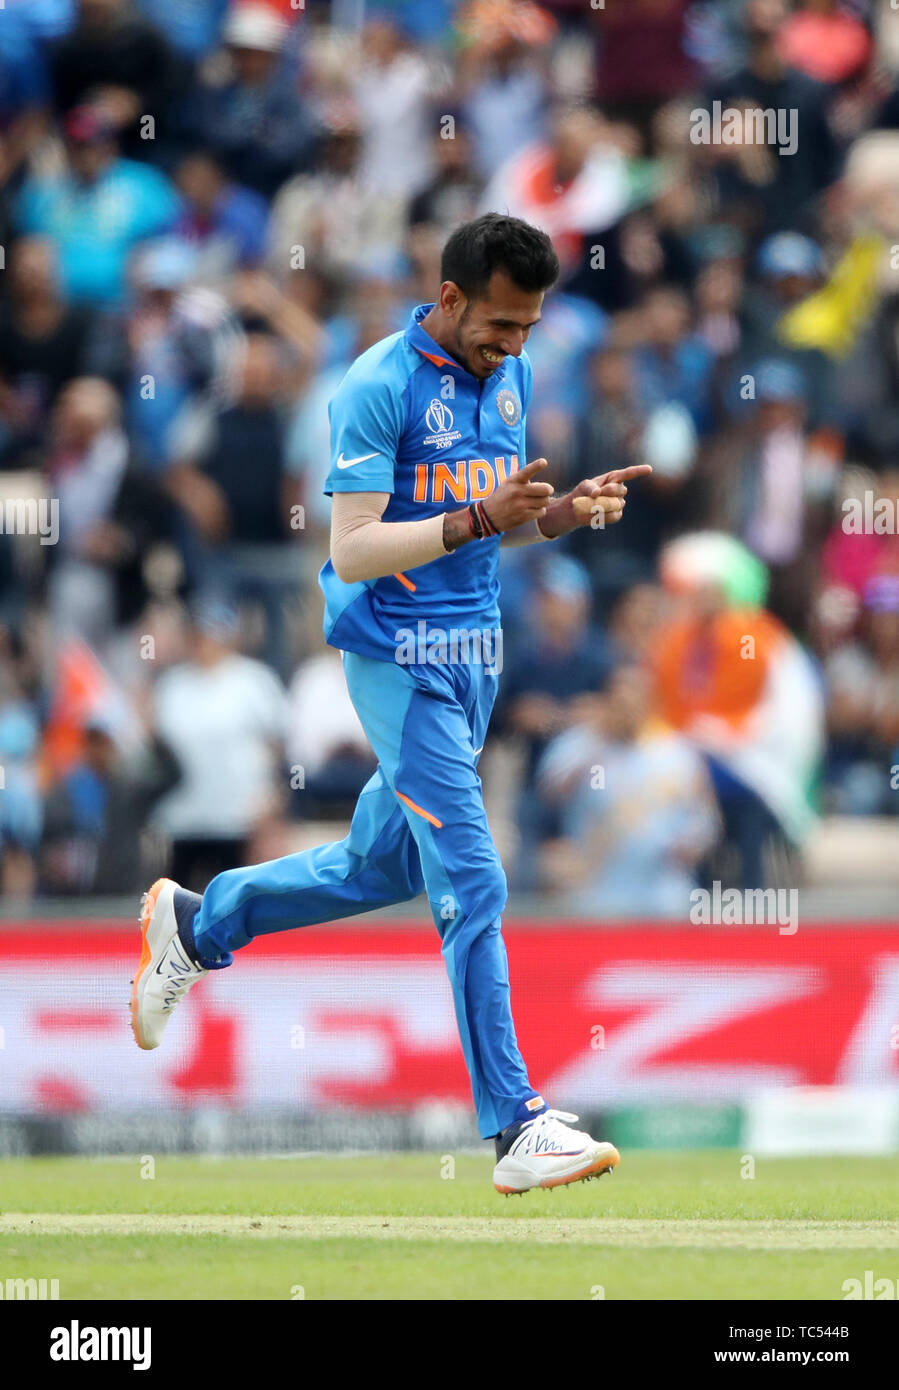 India S Yuzvendra Chahal Left Celebrates Taking The Wicket Of South Africa S Faf Du Plessis During The Icc Cricket World Cup Group Stage Match At The Hampshire Bowl Southampton Stock Photo Alamy